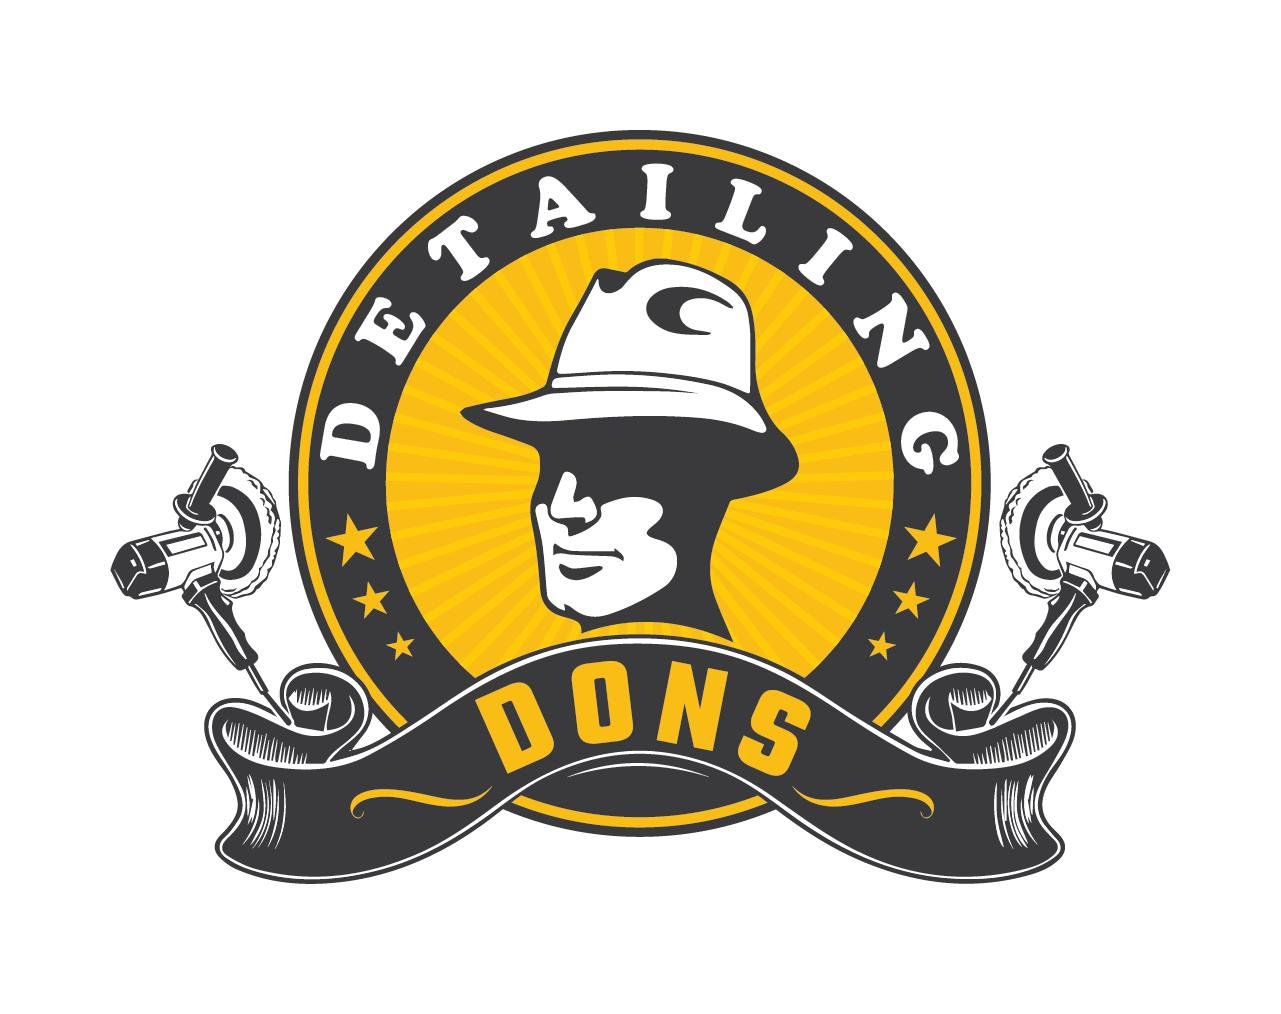 Detailing Dons